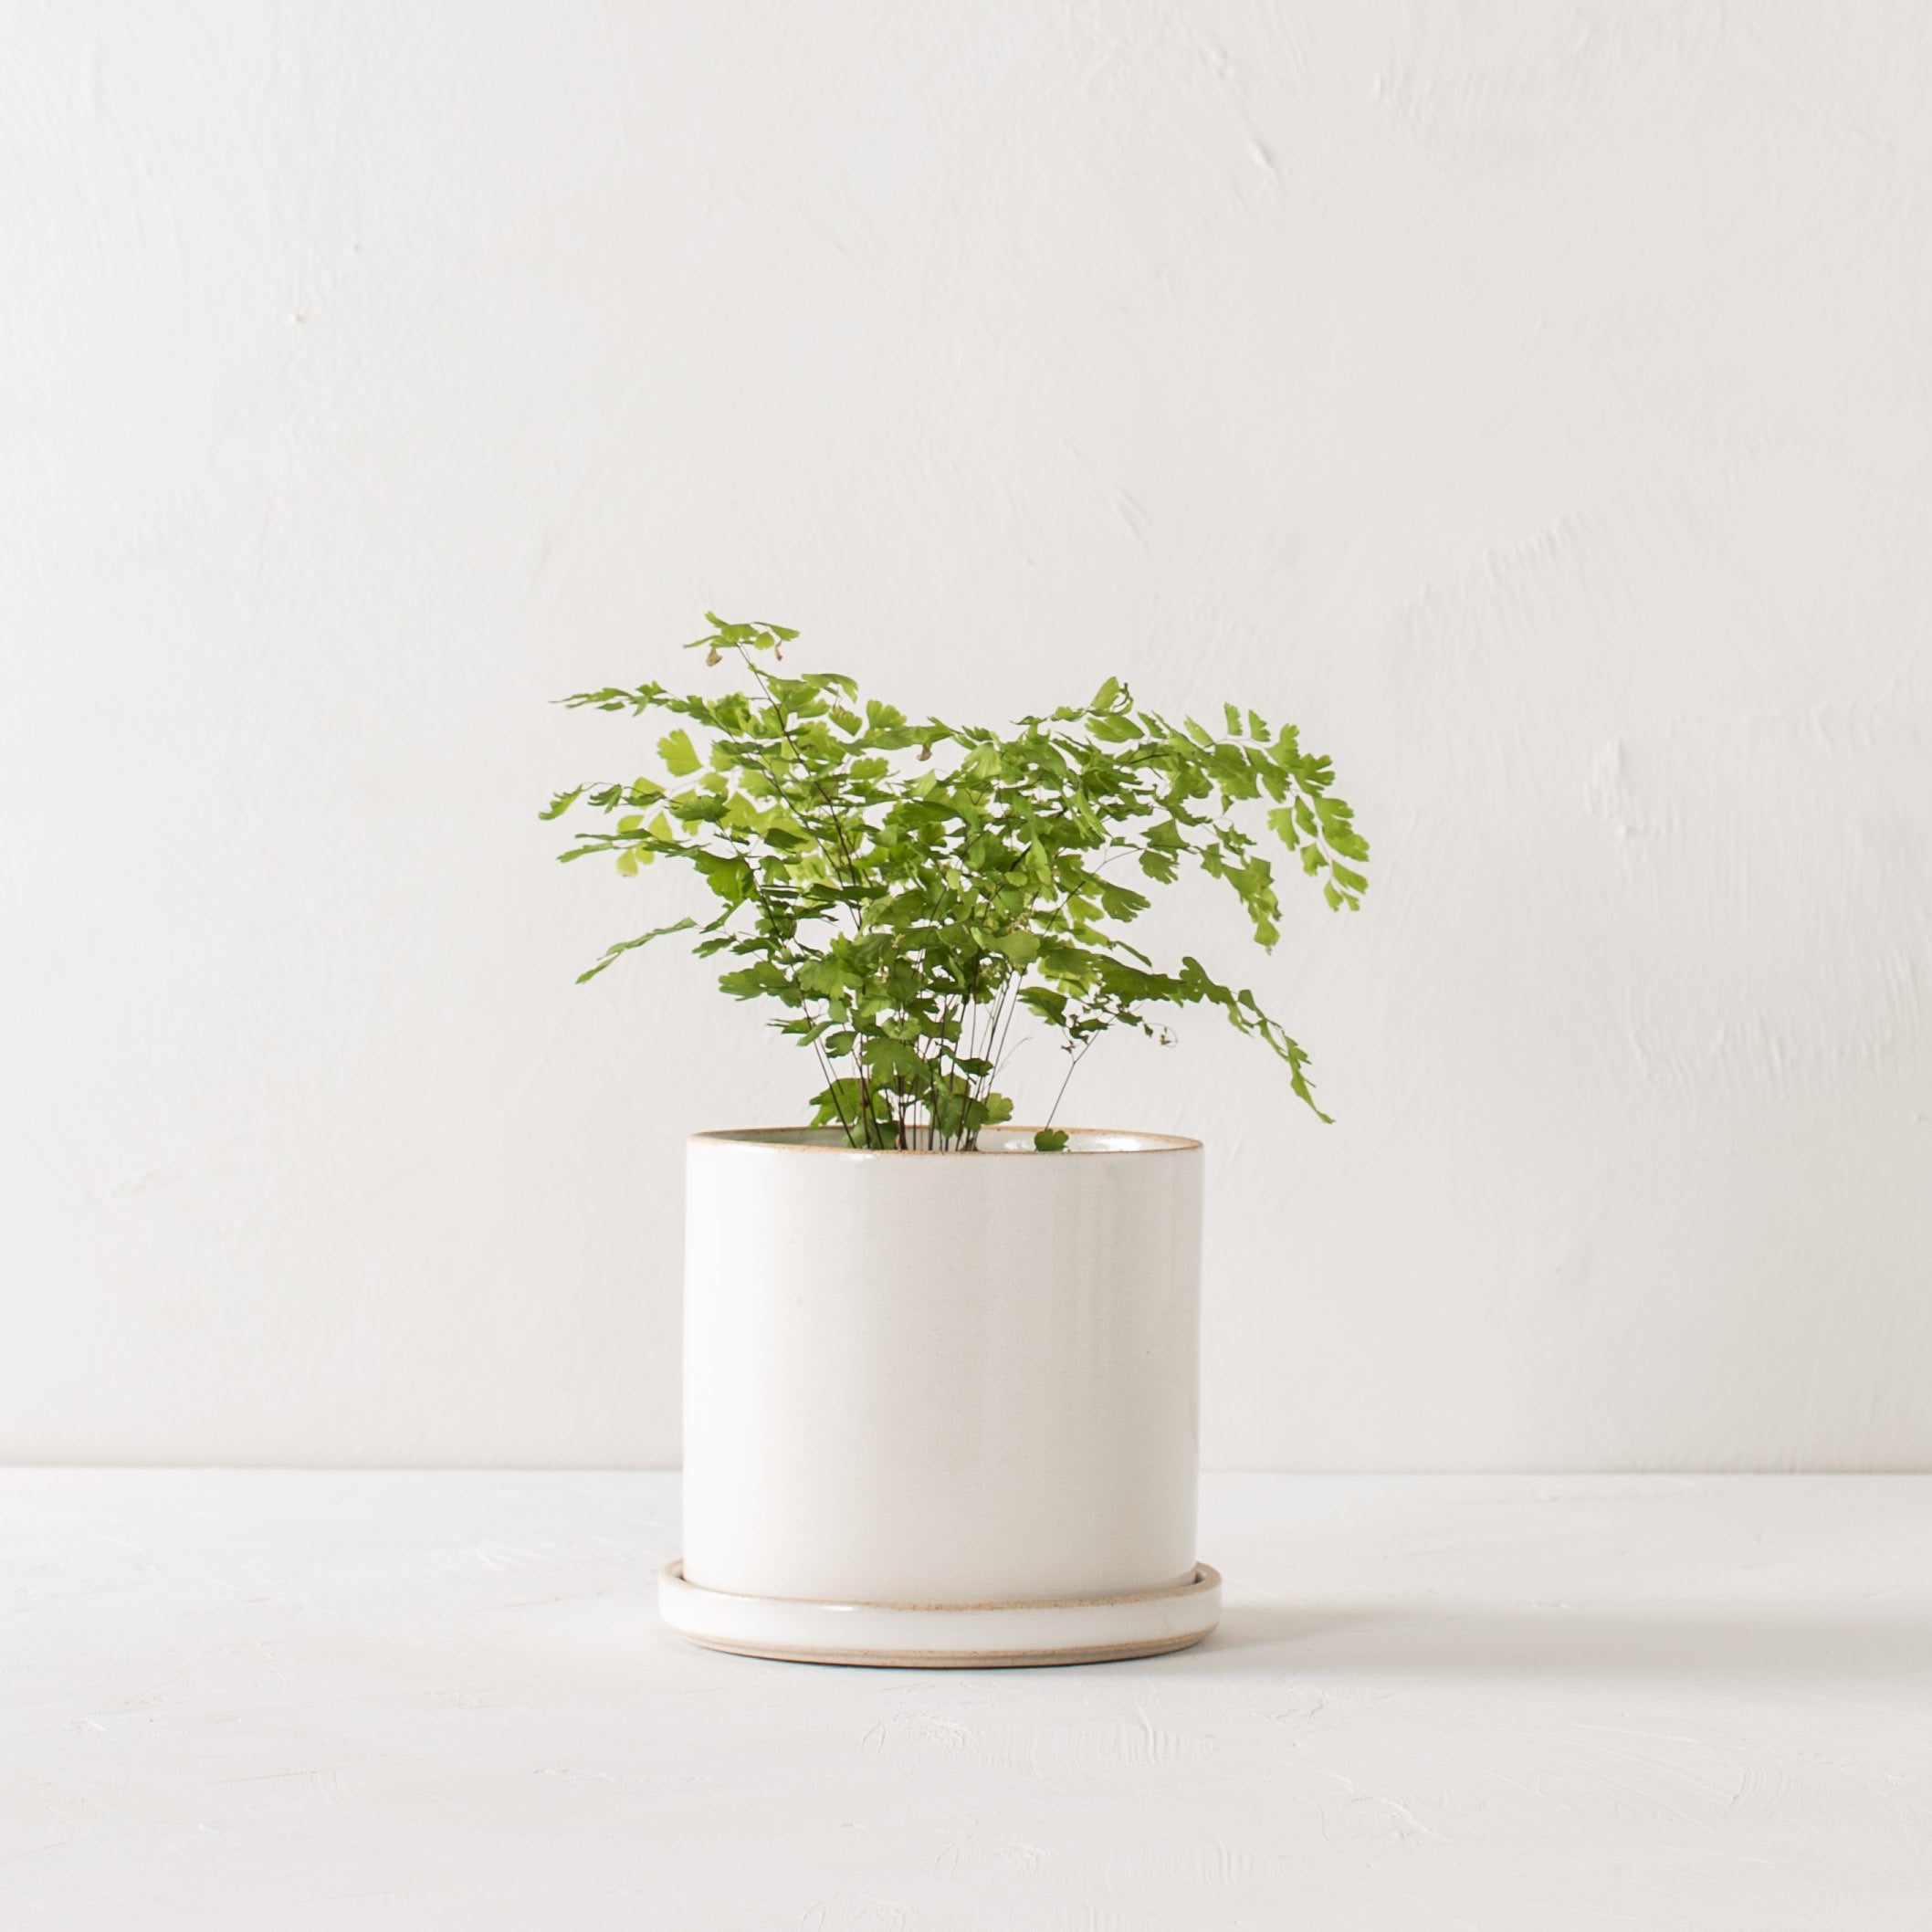 Minimal white 6 inch ceramic planter with bottom drainage dish. Planter houses plant in the center of image on white textured tabletop and white textured backdrop. Handmade ceramic planter, designed by Convivial Production, sold by Shop Verdant, Kansas City, Mo Plant store.